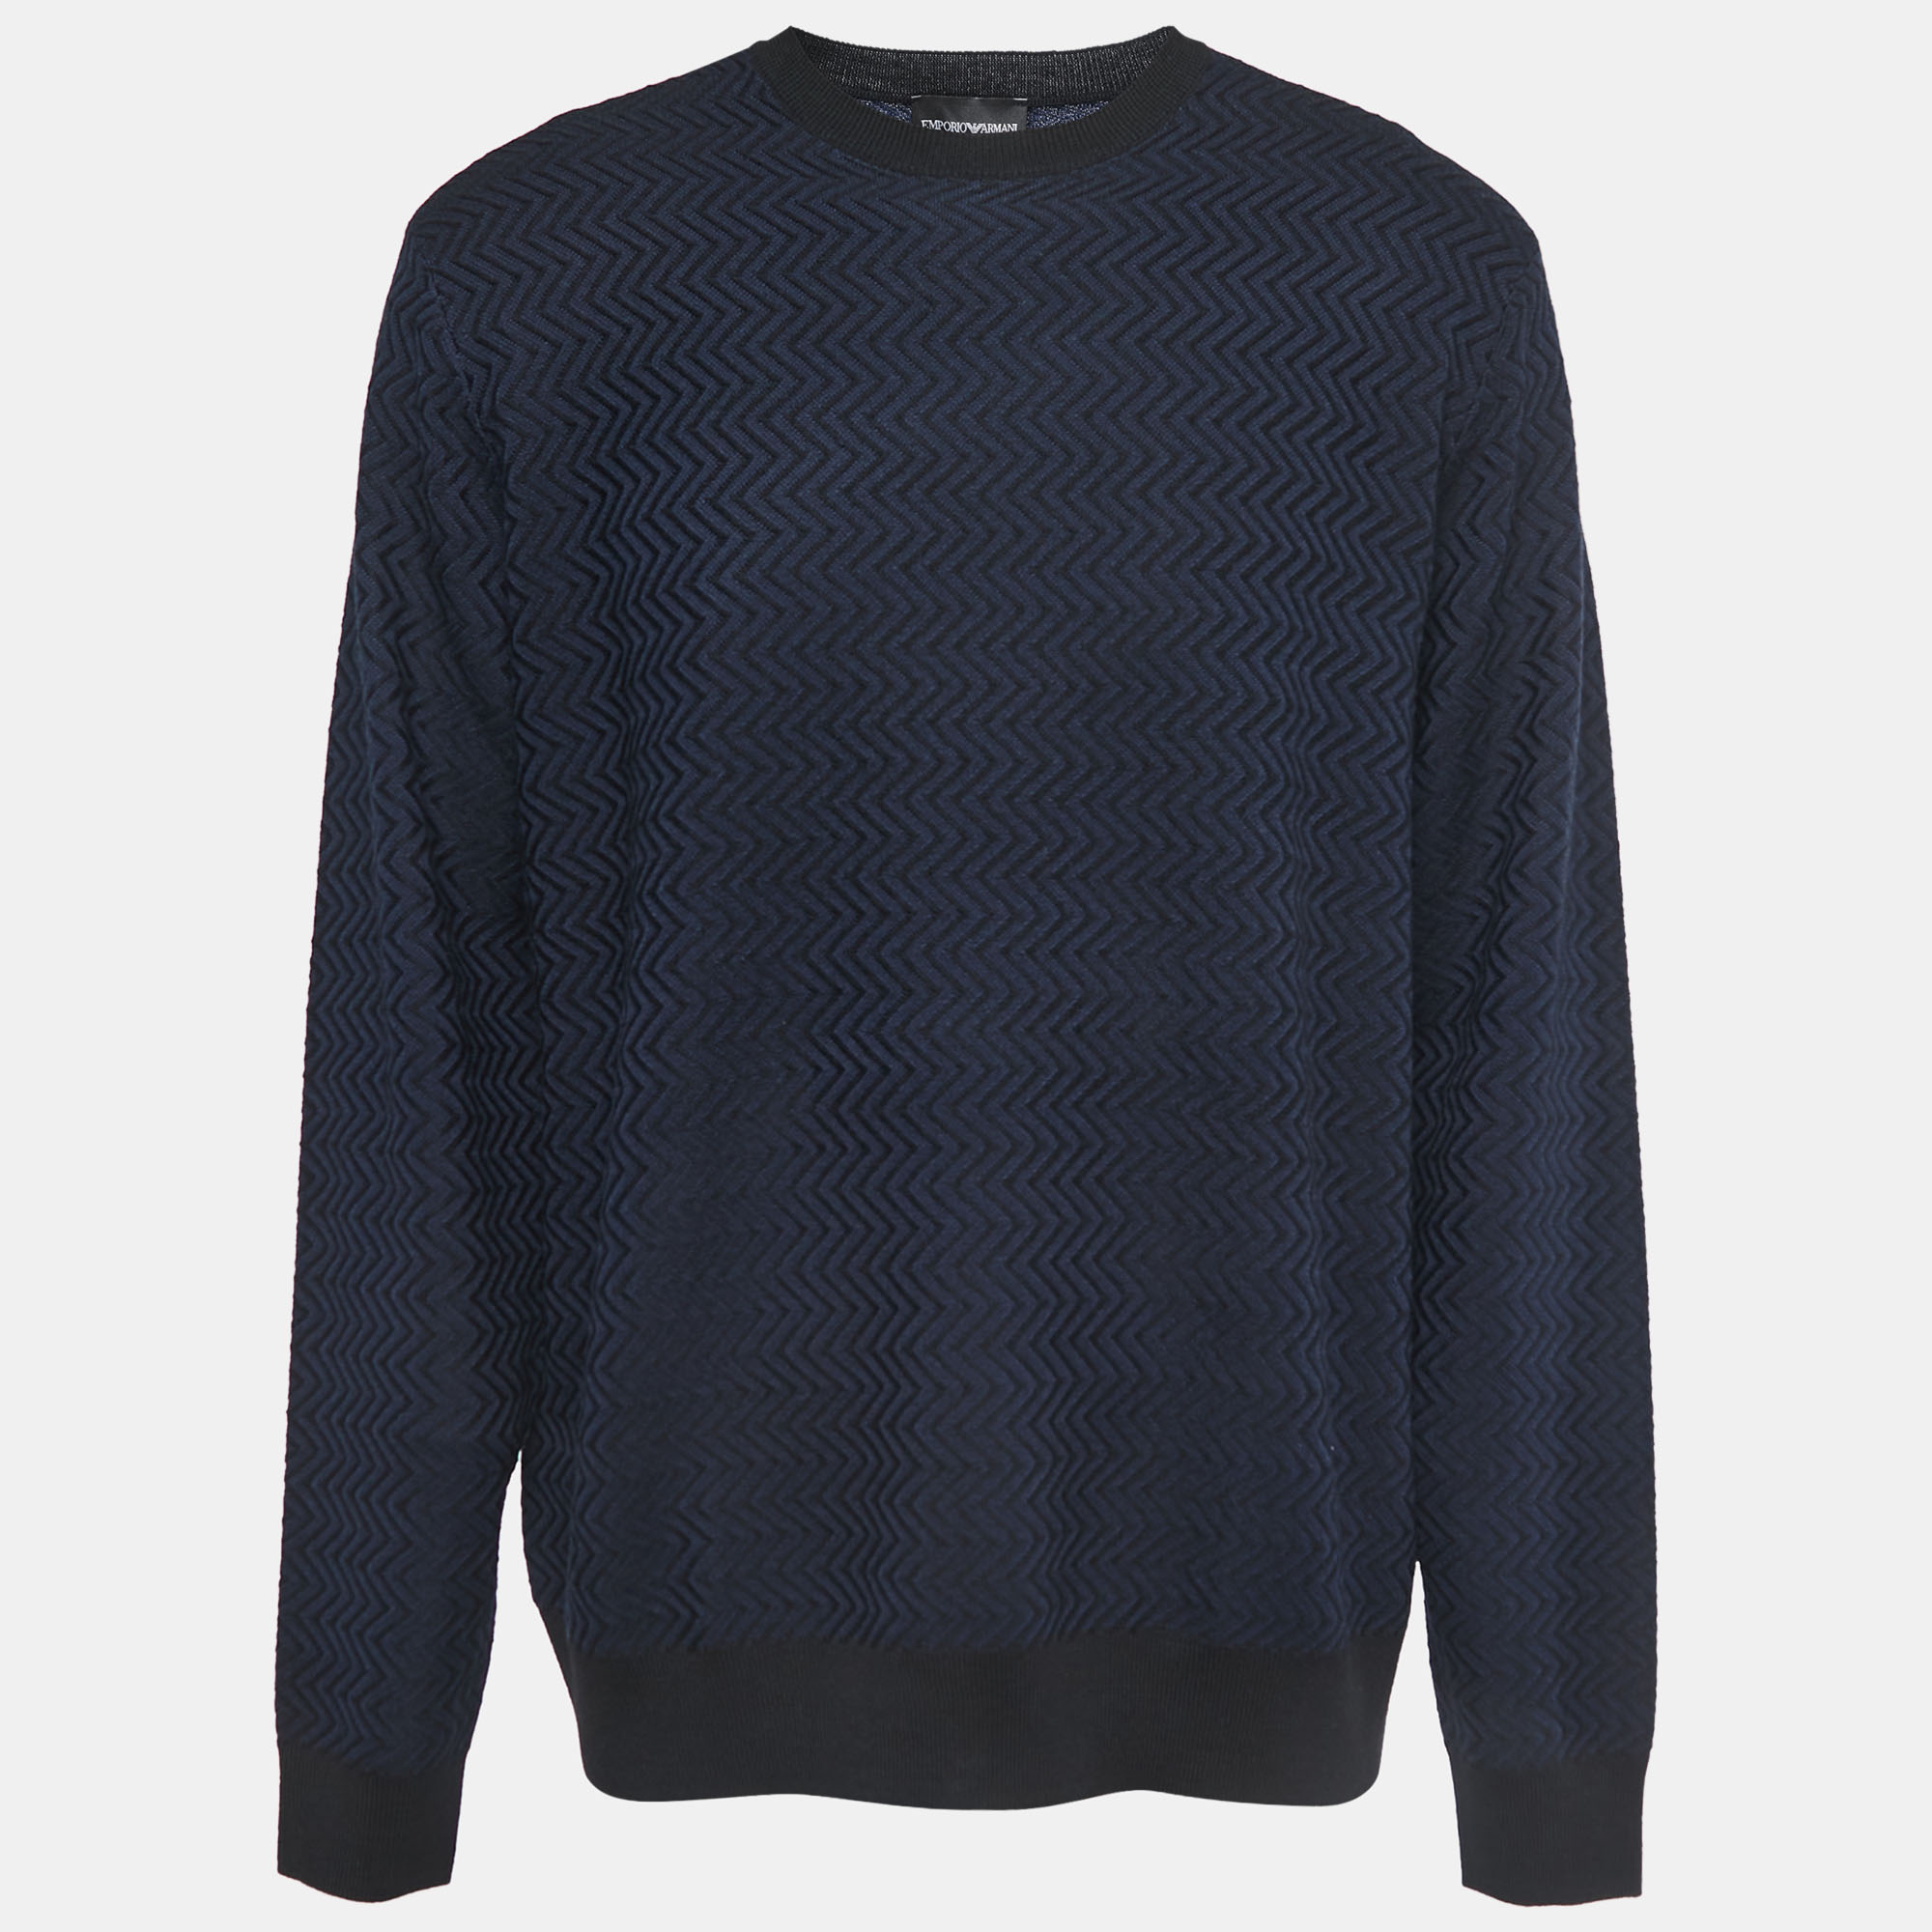 

Emporio Armani Navy Blue/Black Patterned Wool Knit Crew Neck Sweater 3XL